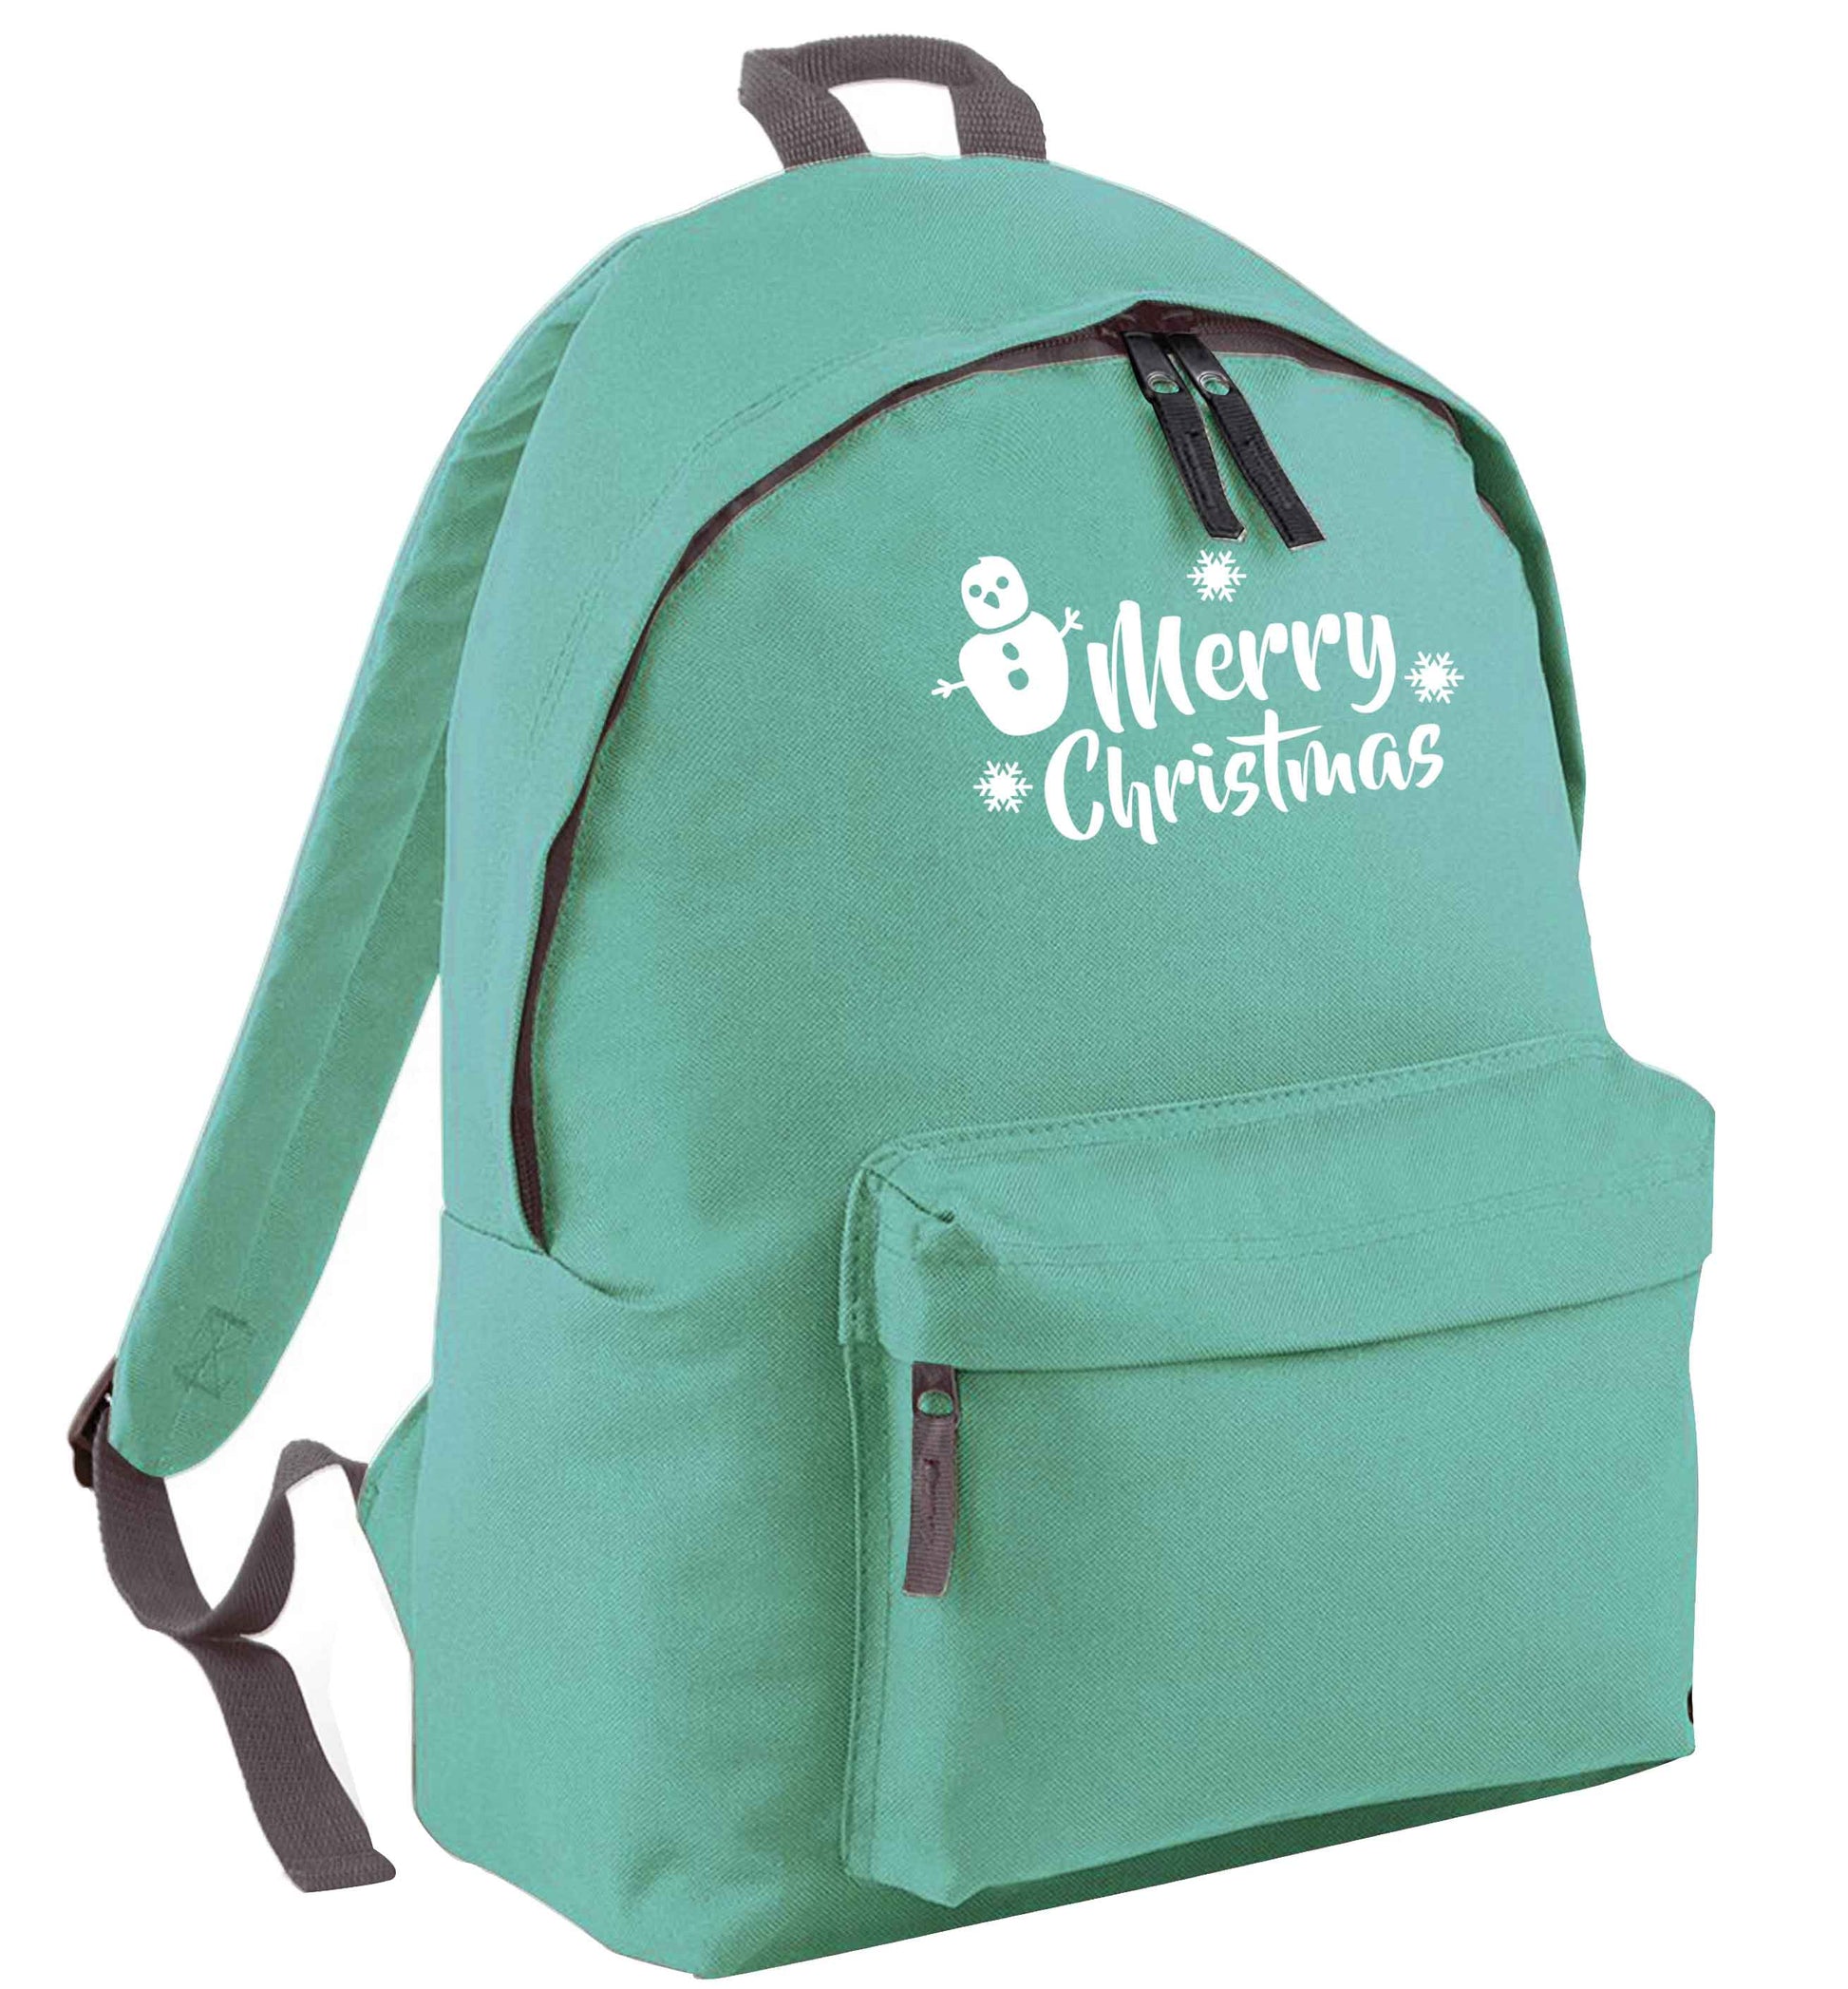 Merry Christmas - snowman mint adults backpack